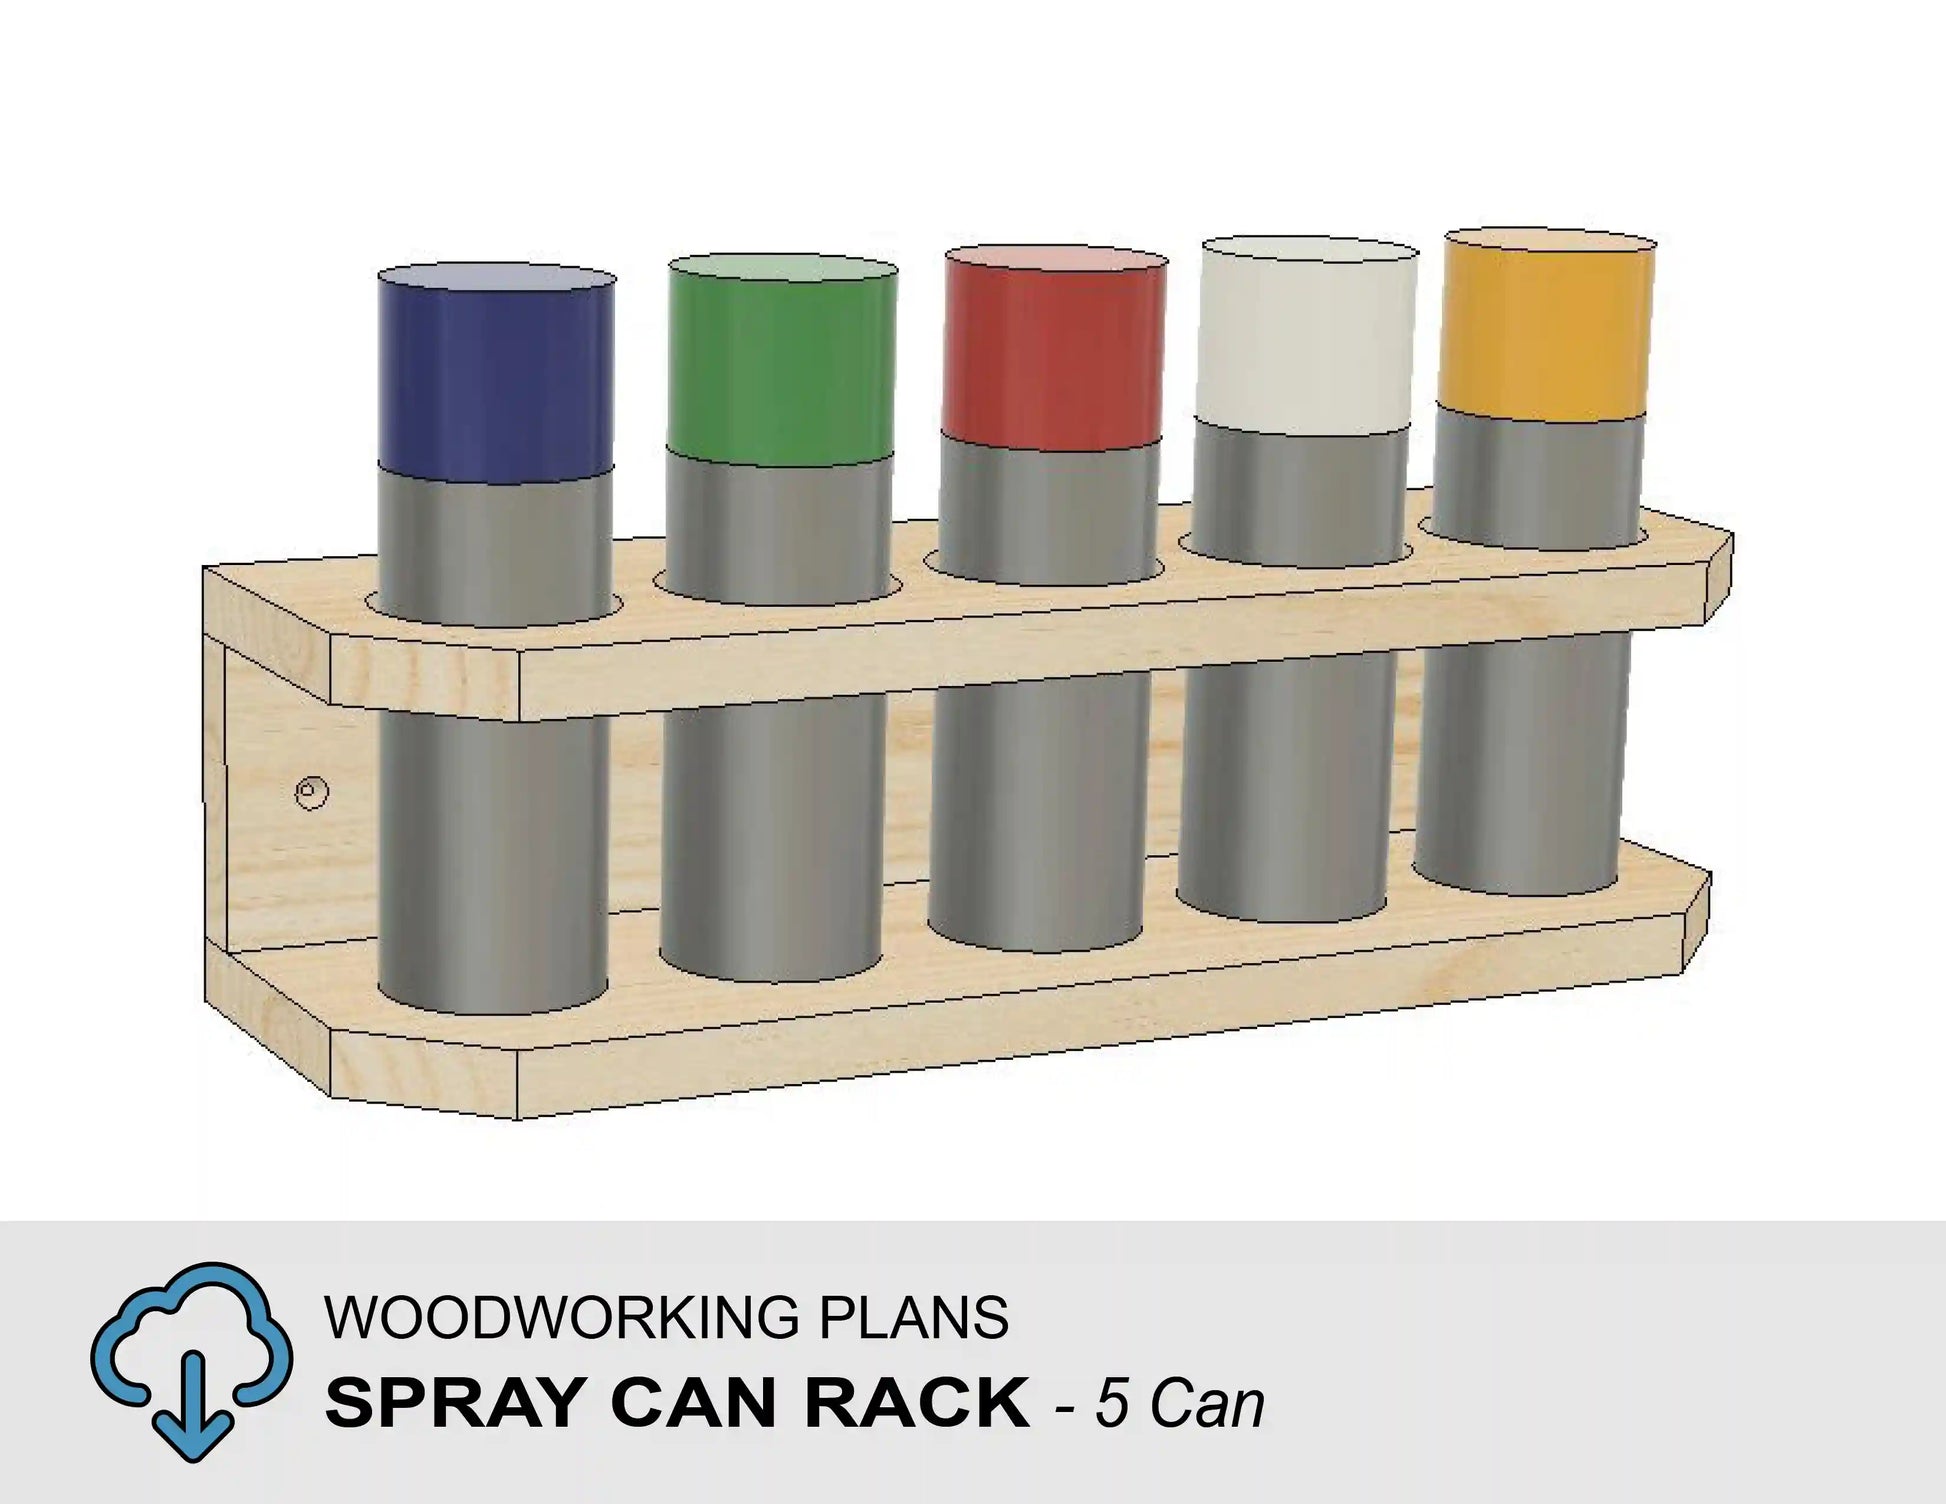 Rotating Spray Paint Storage Cabinet Build Plans - Houseful of